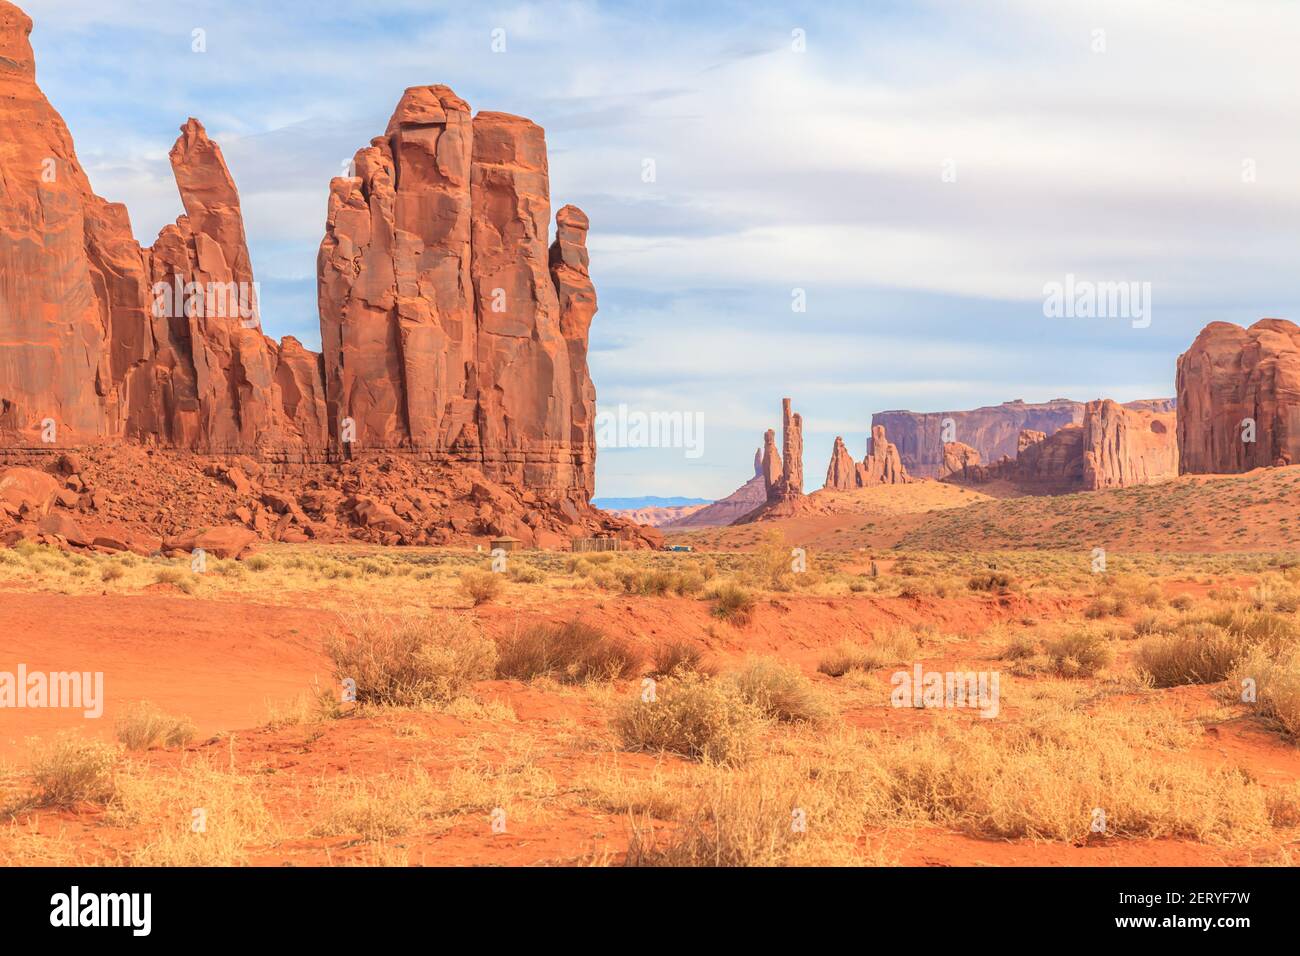 Rock formation at Monument Valley Stock Photo